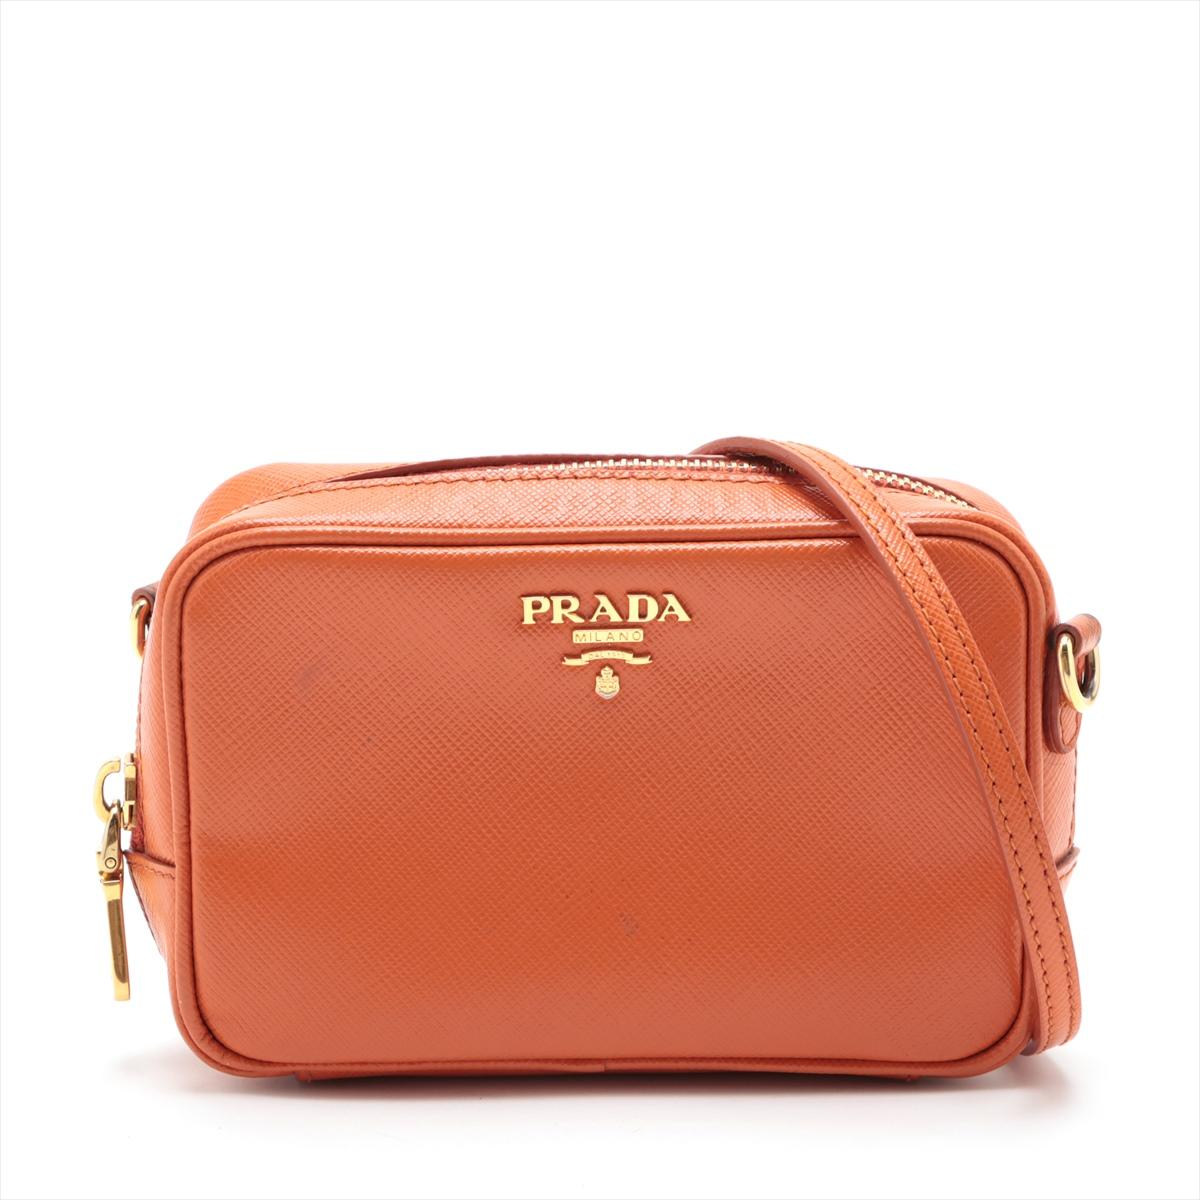 The Prada Saffiano Leather Camera Bag in Orange is a vibrant and stylish accessory that reflects Prada's renowned craftsmanship and contemporary design aesthetic. The camera bag features the iconic Saffiano leather, known for its distinctive